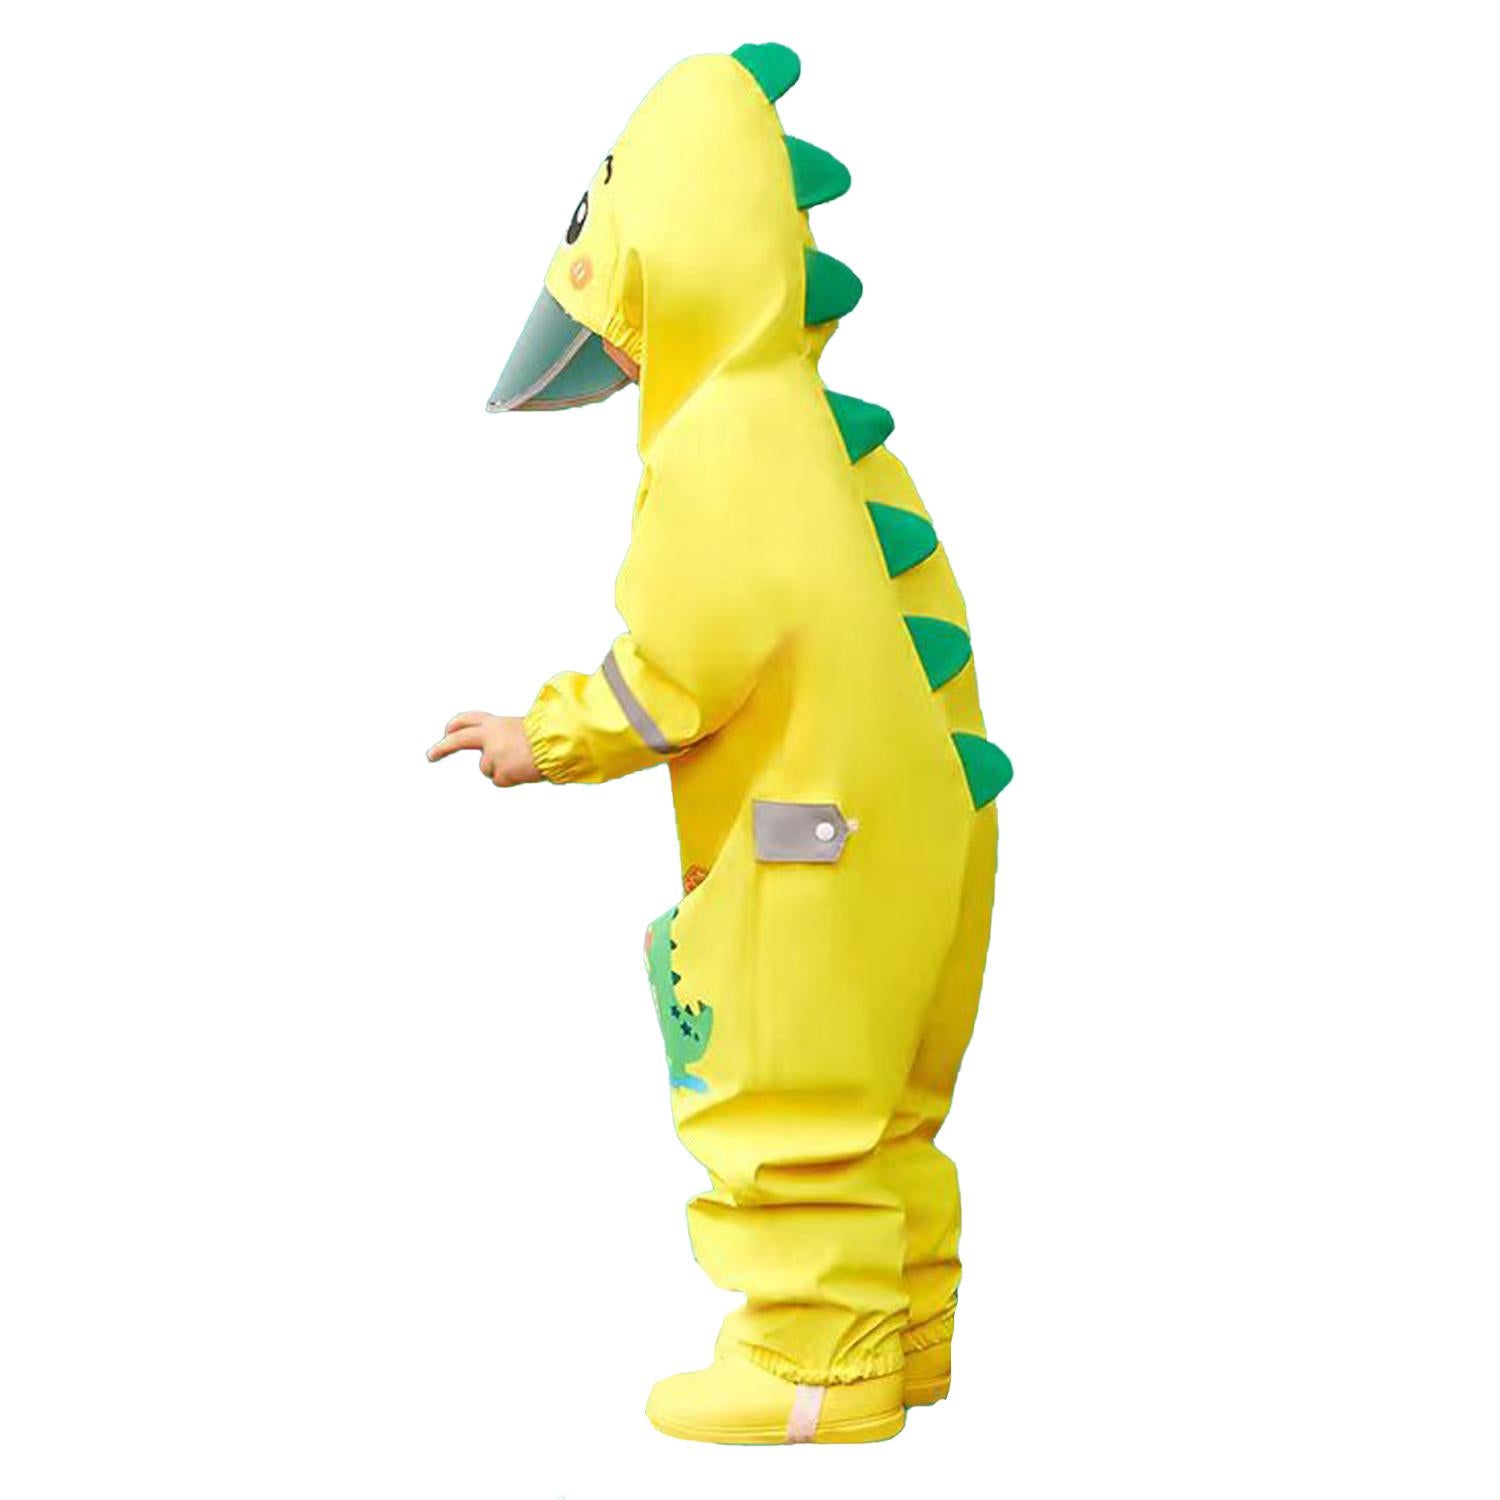 Little Surprise Box Yellow Parachute Dino theme full Jumpsuit Style Raincoat for Toddlers and Kids